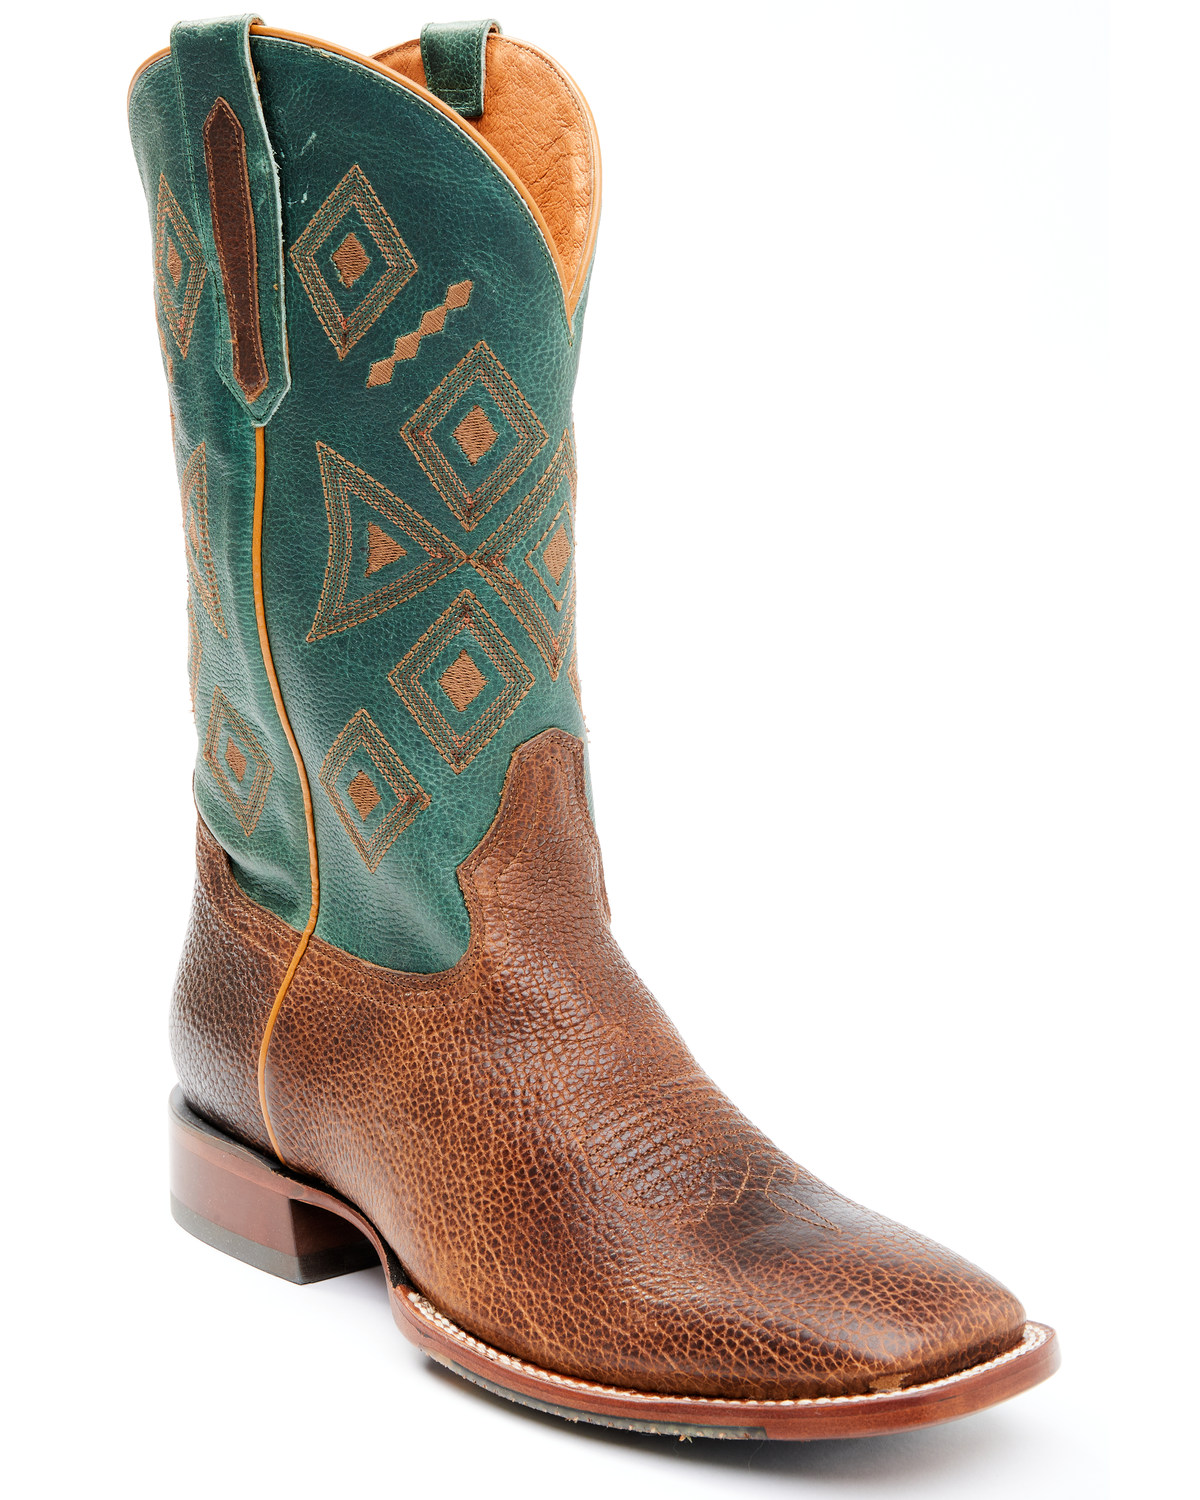 Cody James Men's Maximo Western Performance Boots - Broad Square Toe